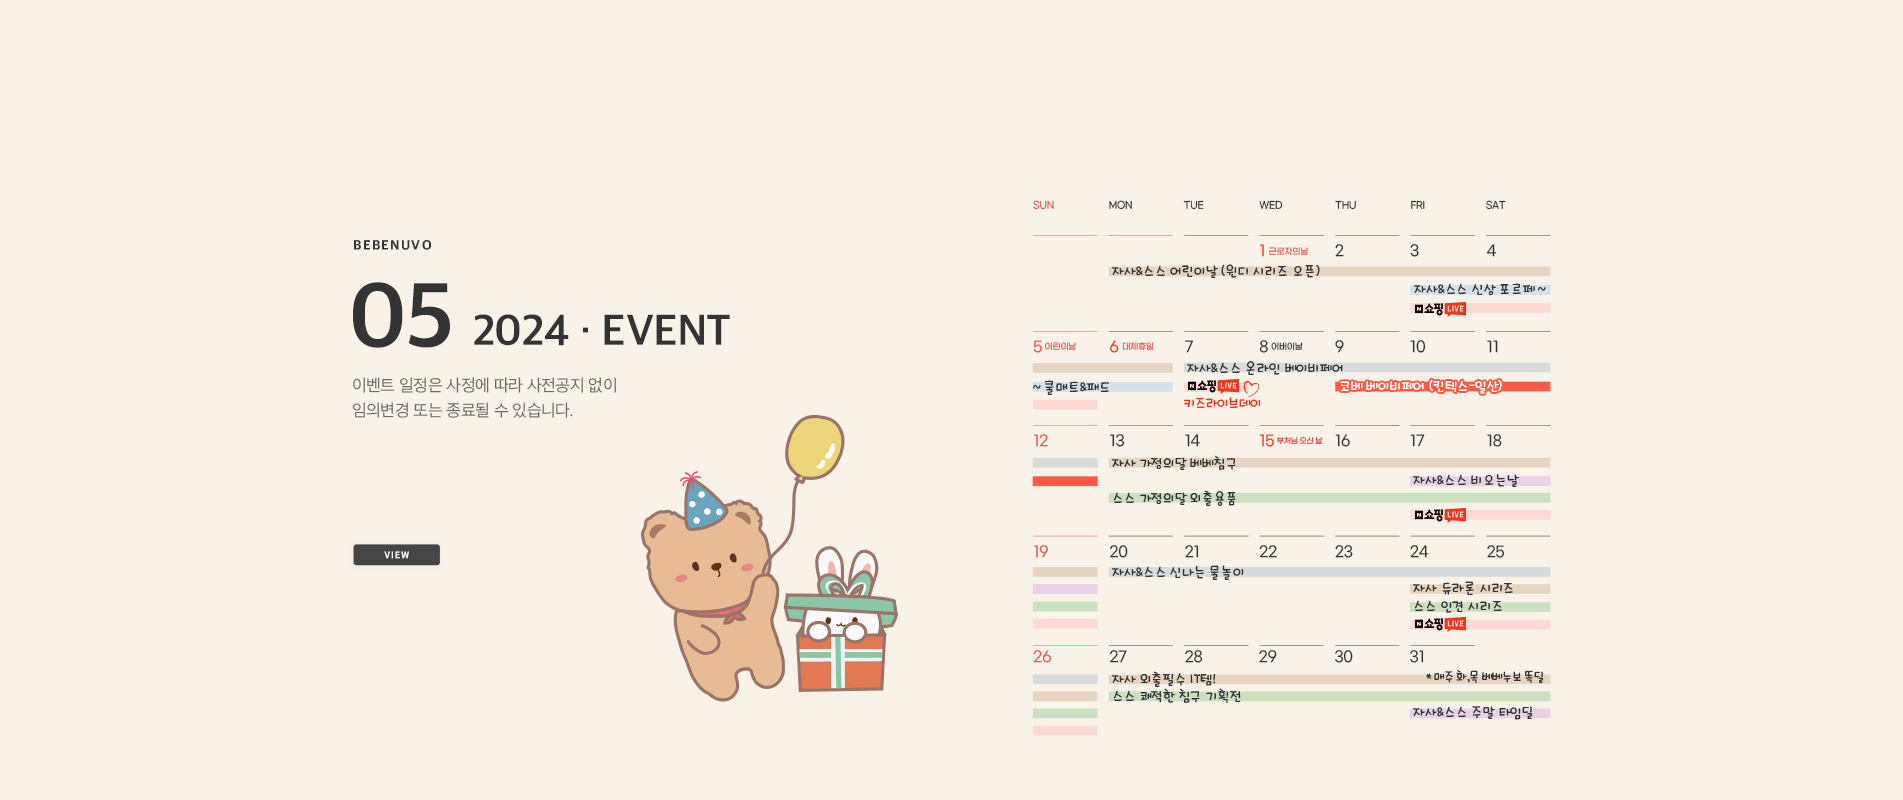 MONTHLY EVENT